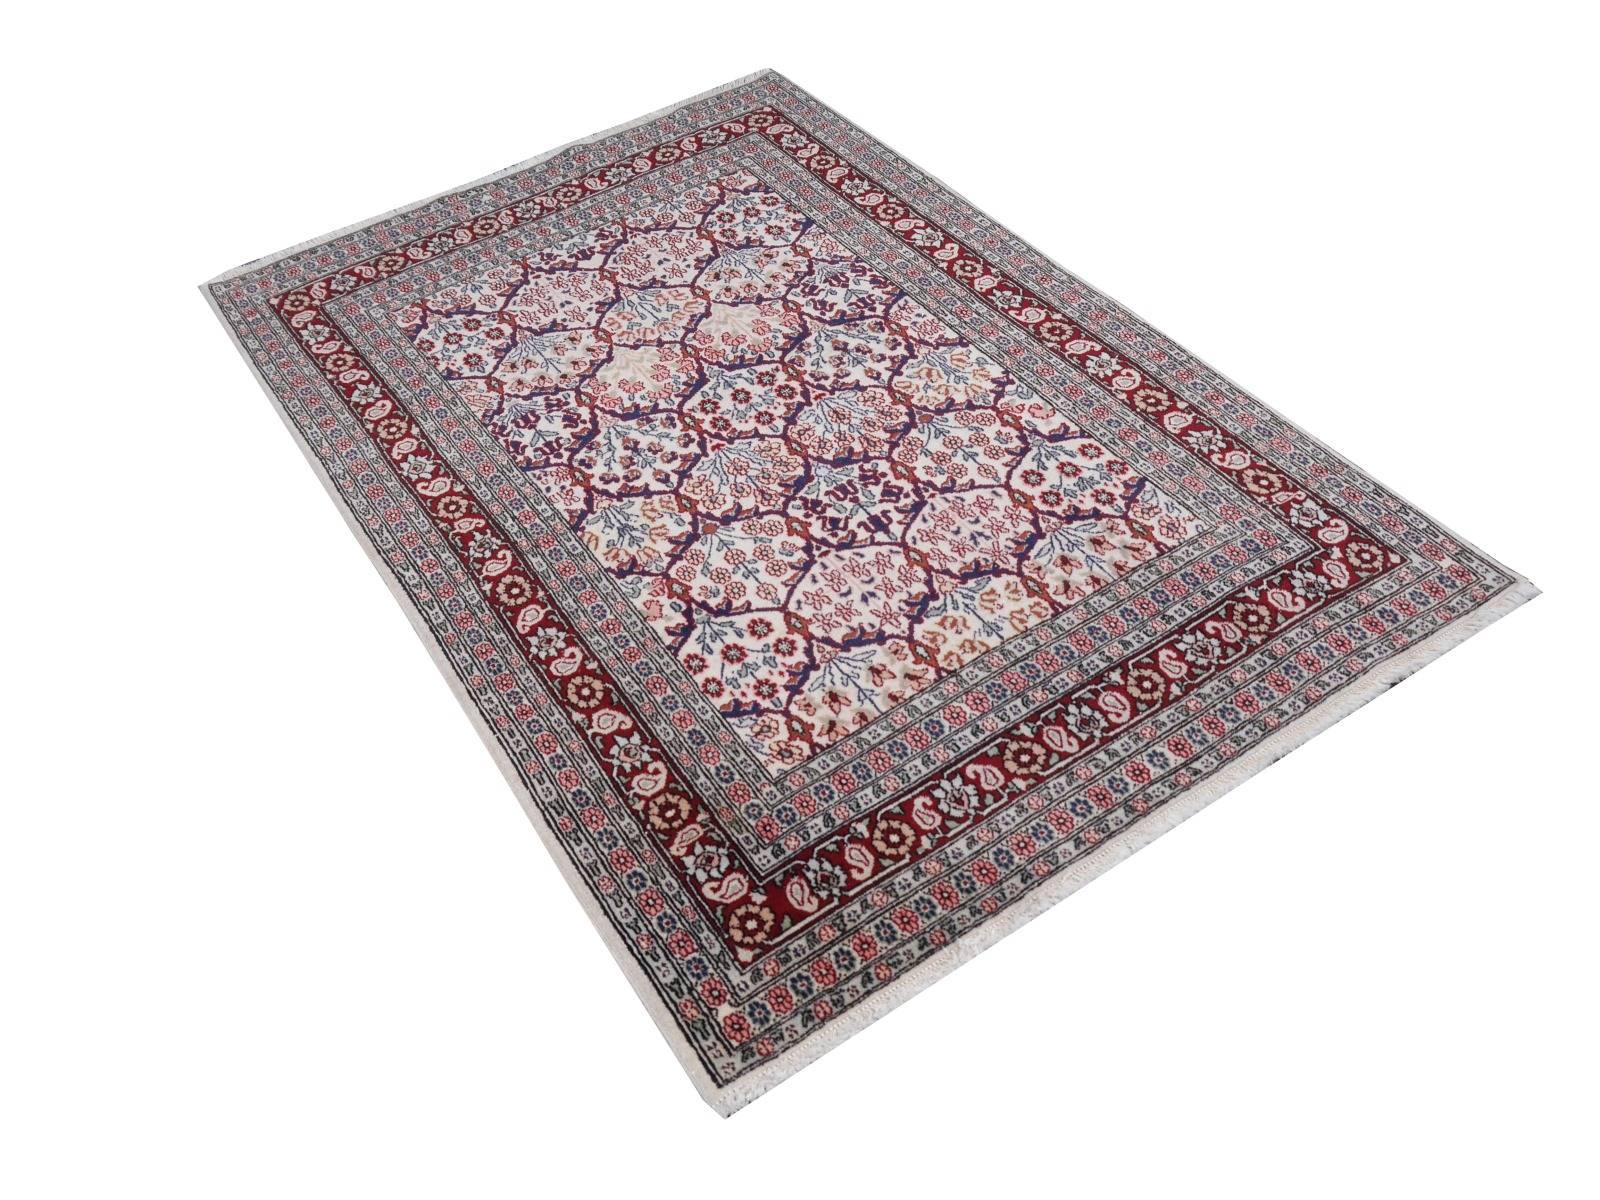 Vintage Turkish Hereke Rug hand-knotted with watermelon design In Good Condition For Sale In Lohr, Bavaria, DE